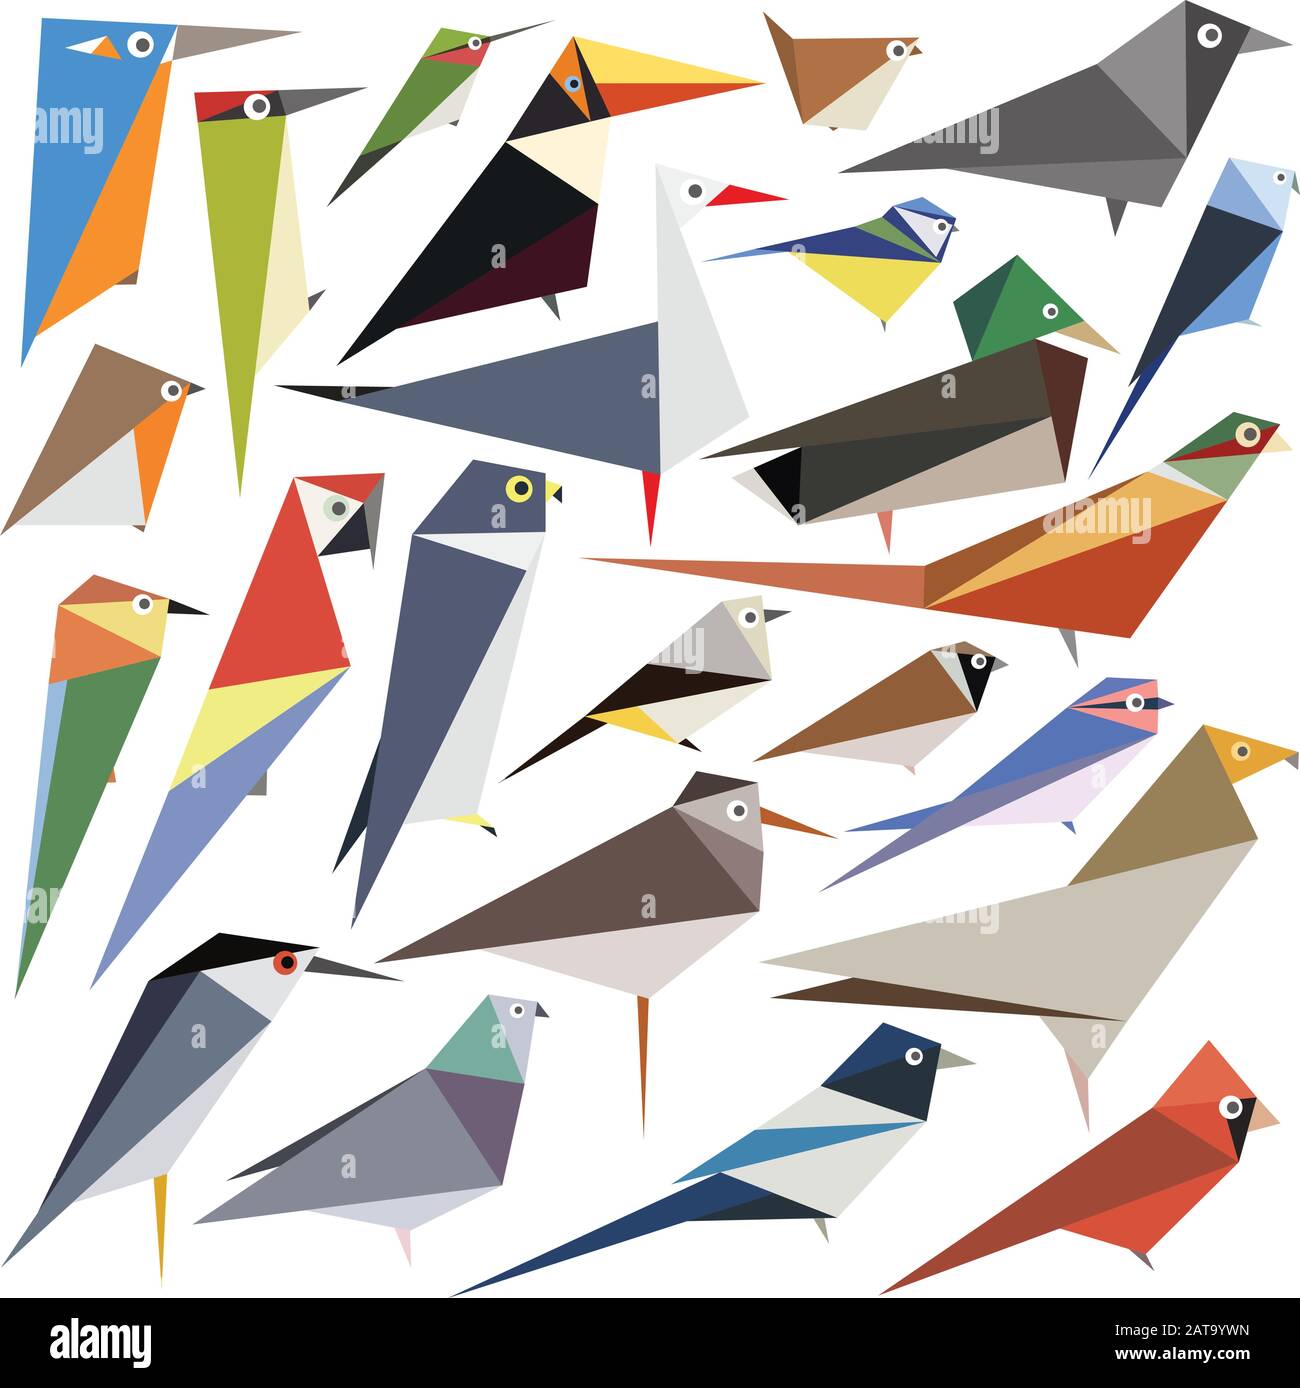 Collection of editable vector bird designs made from simple shapes Stock Vector